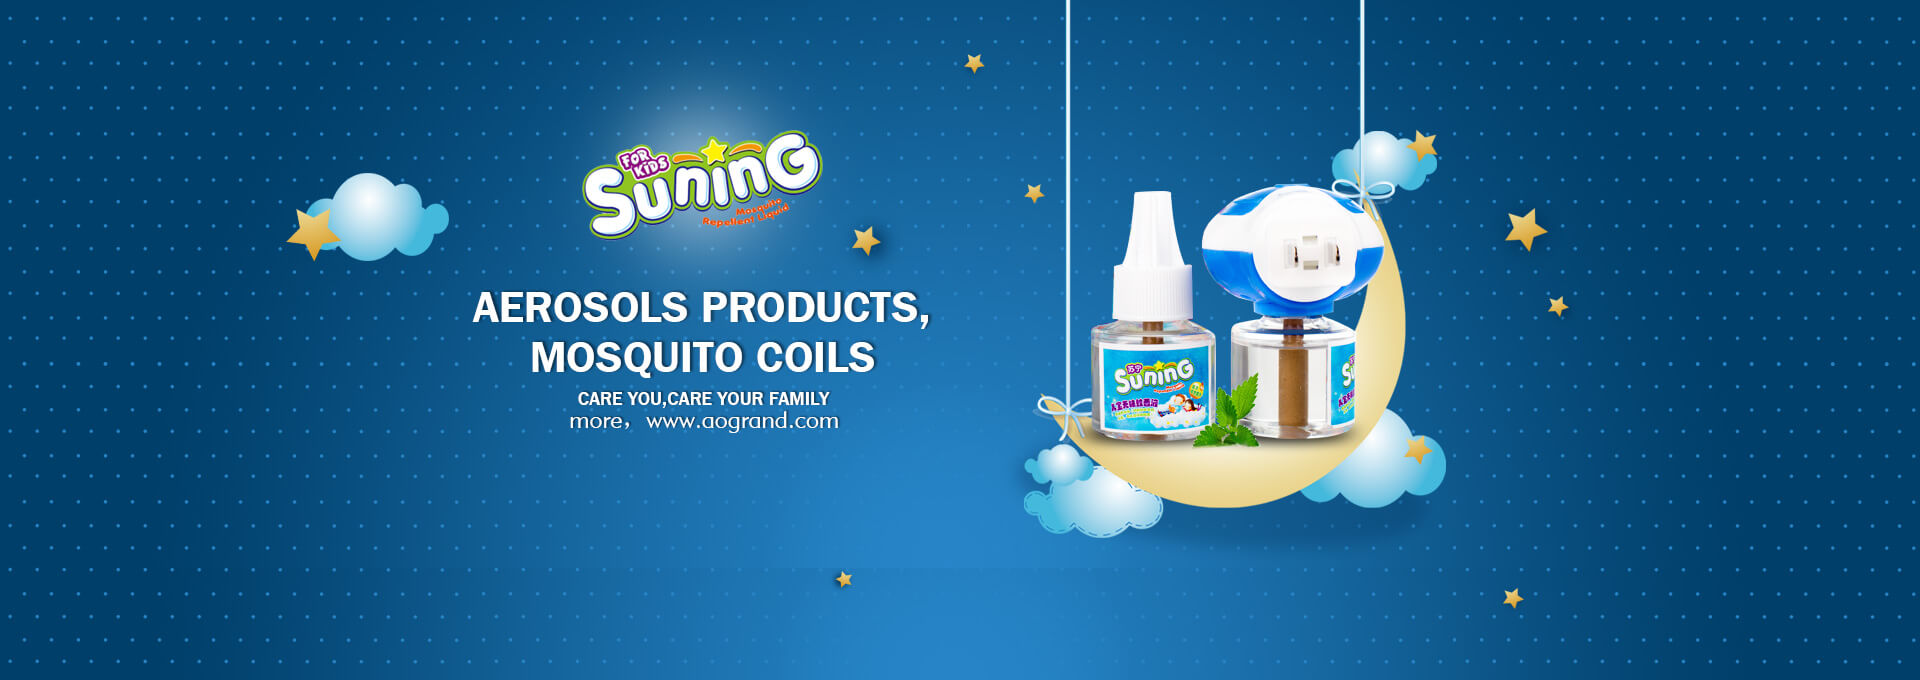 smelless mosquito liquid single liquid pack for baby & kids SUNING